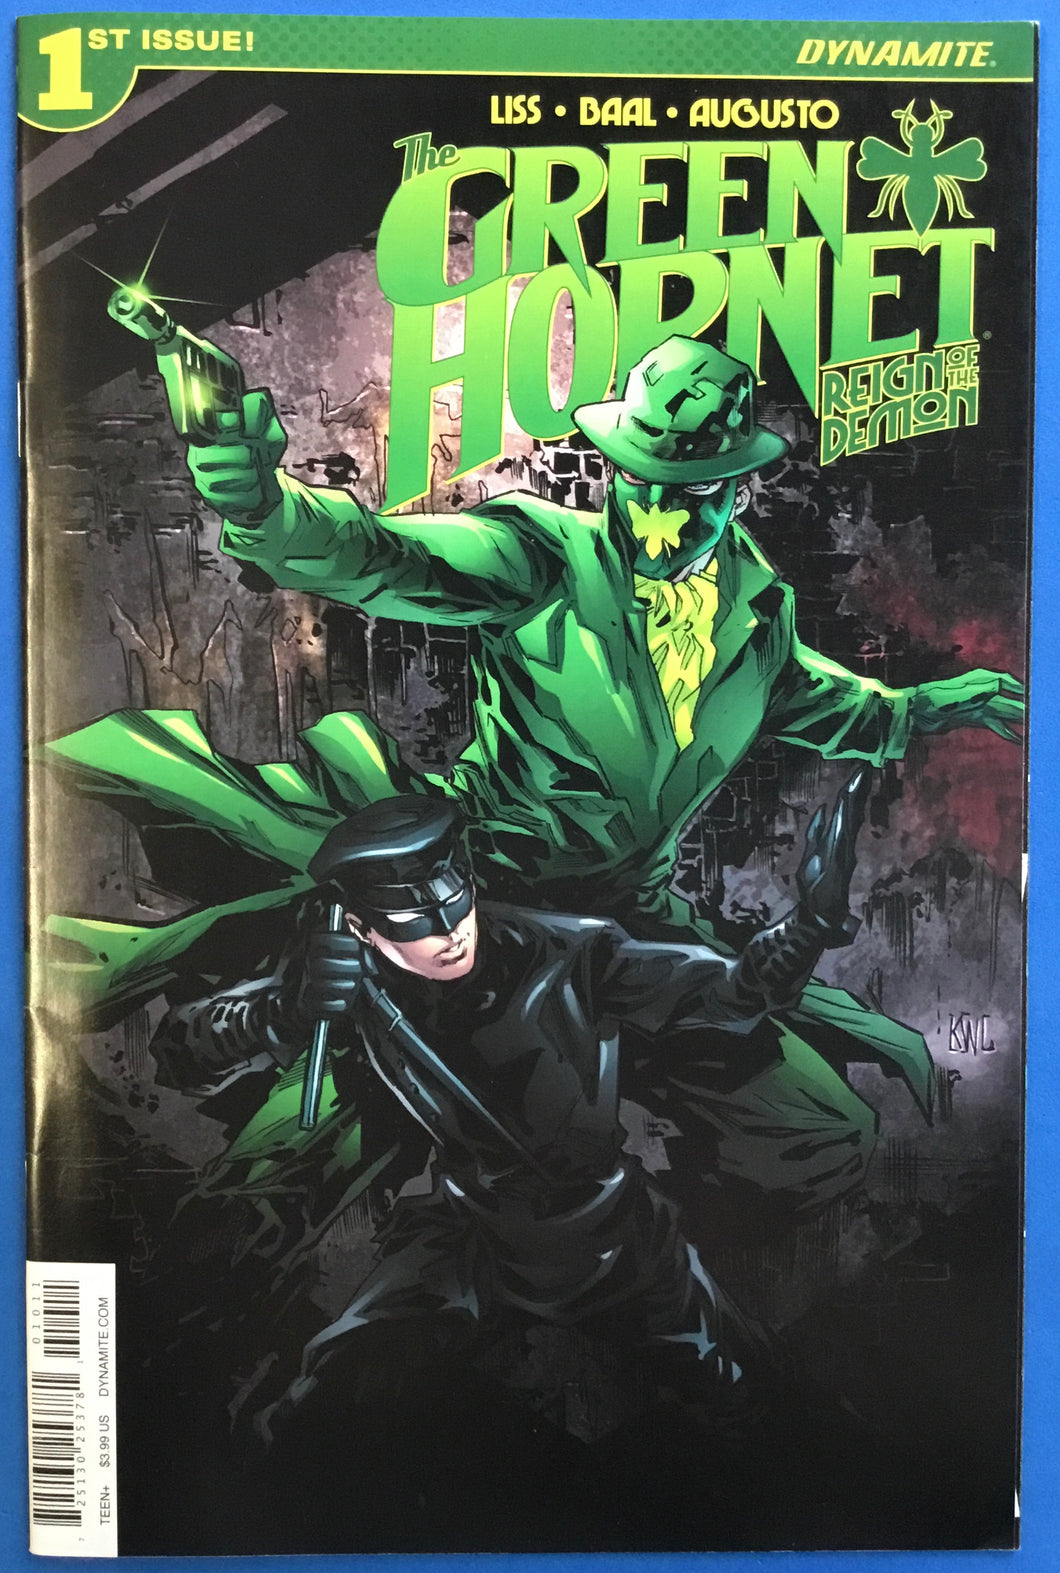 The Green Hornet: Reign of the Demon No. #1 2016 Dynamite Comics